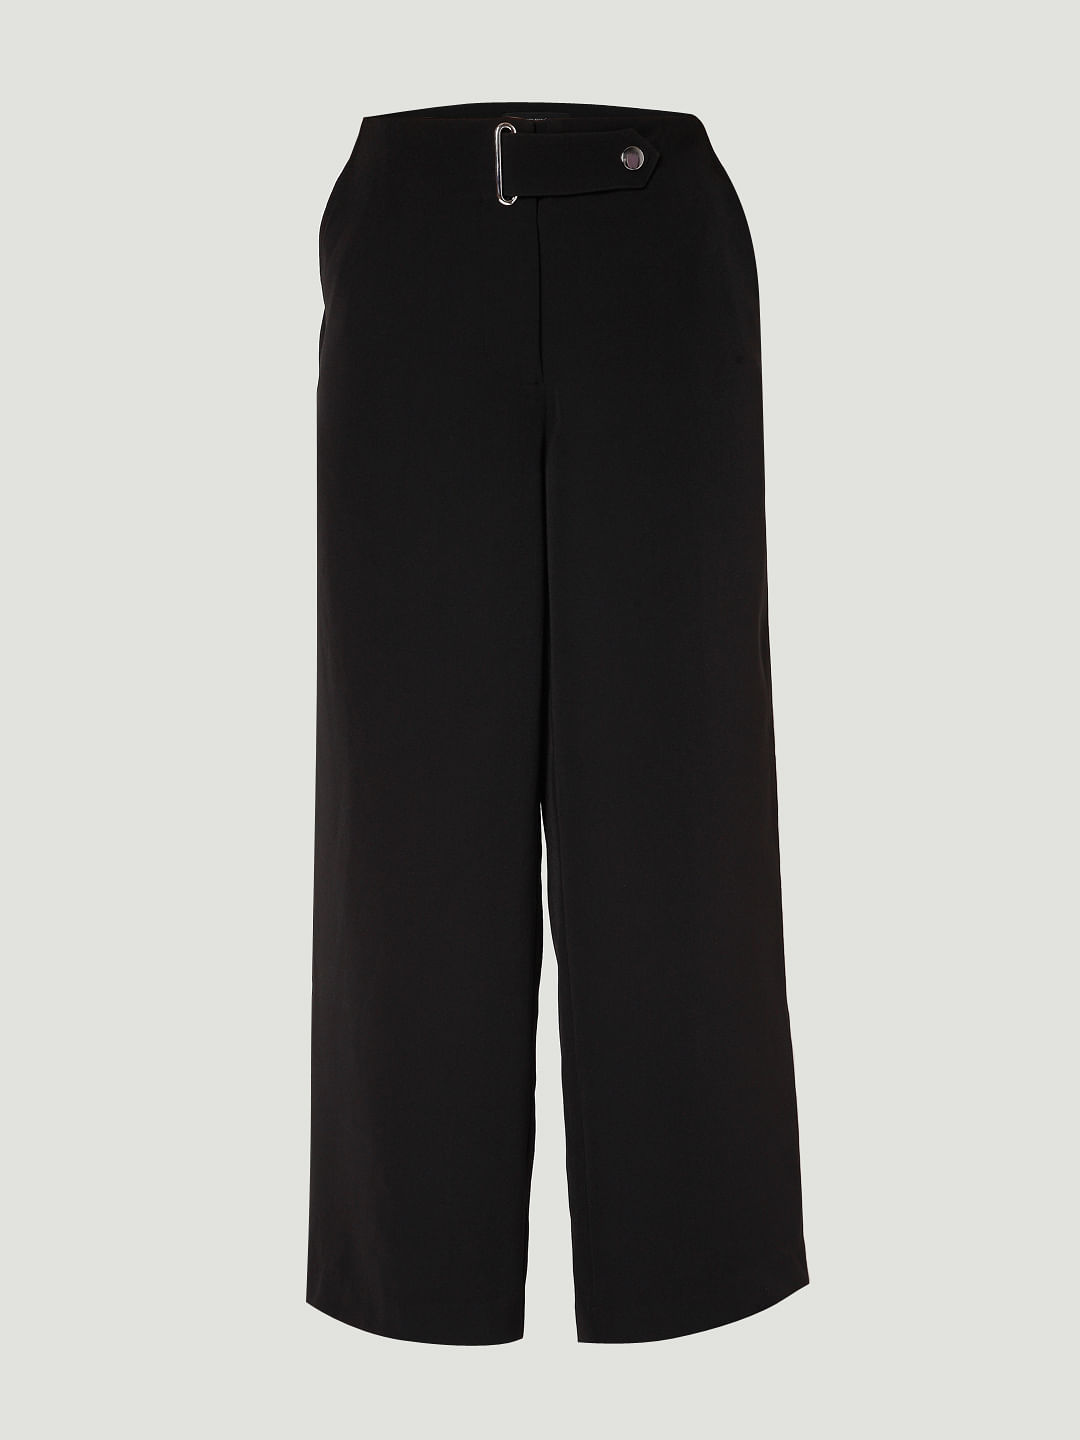 Skinny trousers with chain details black ladies' | Morgan